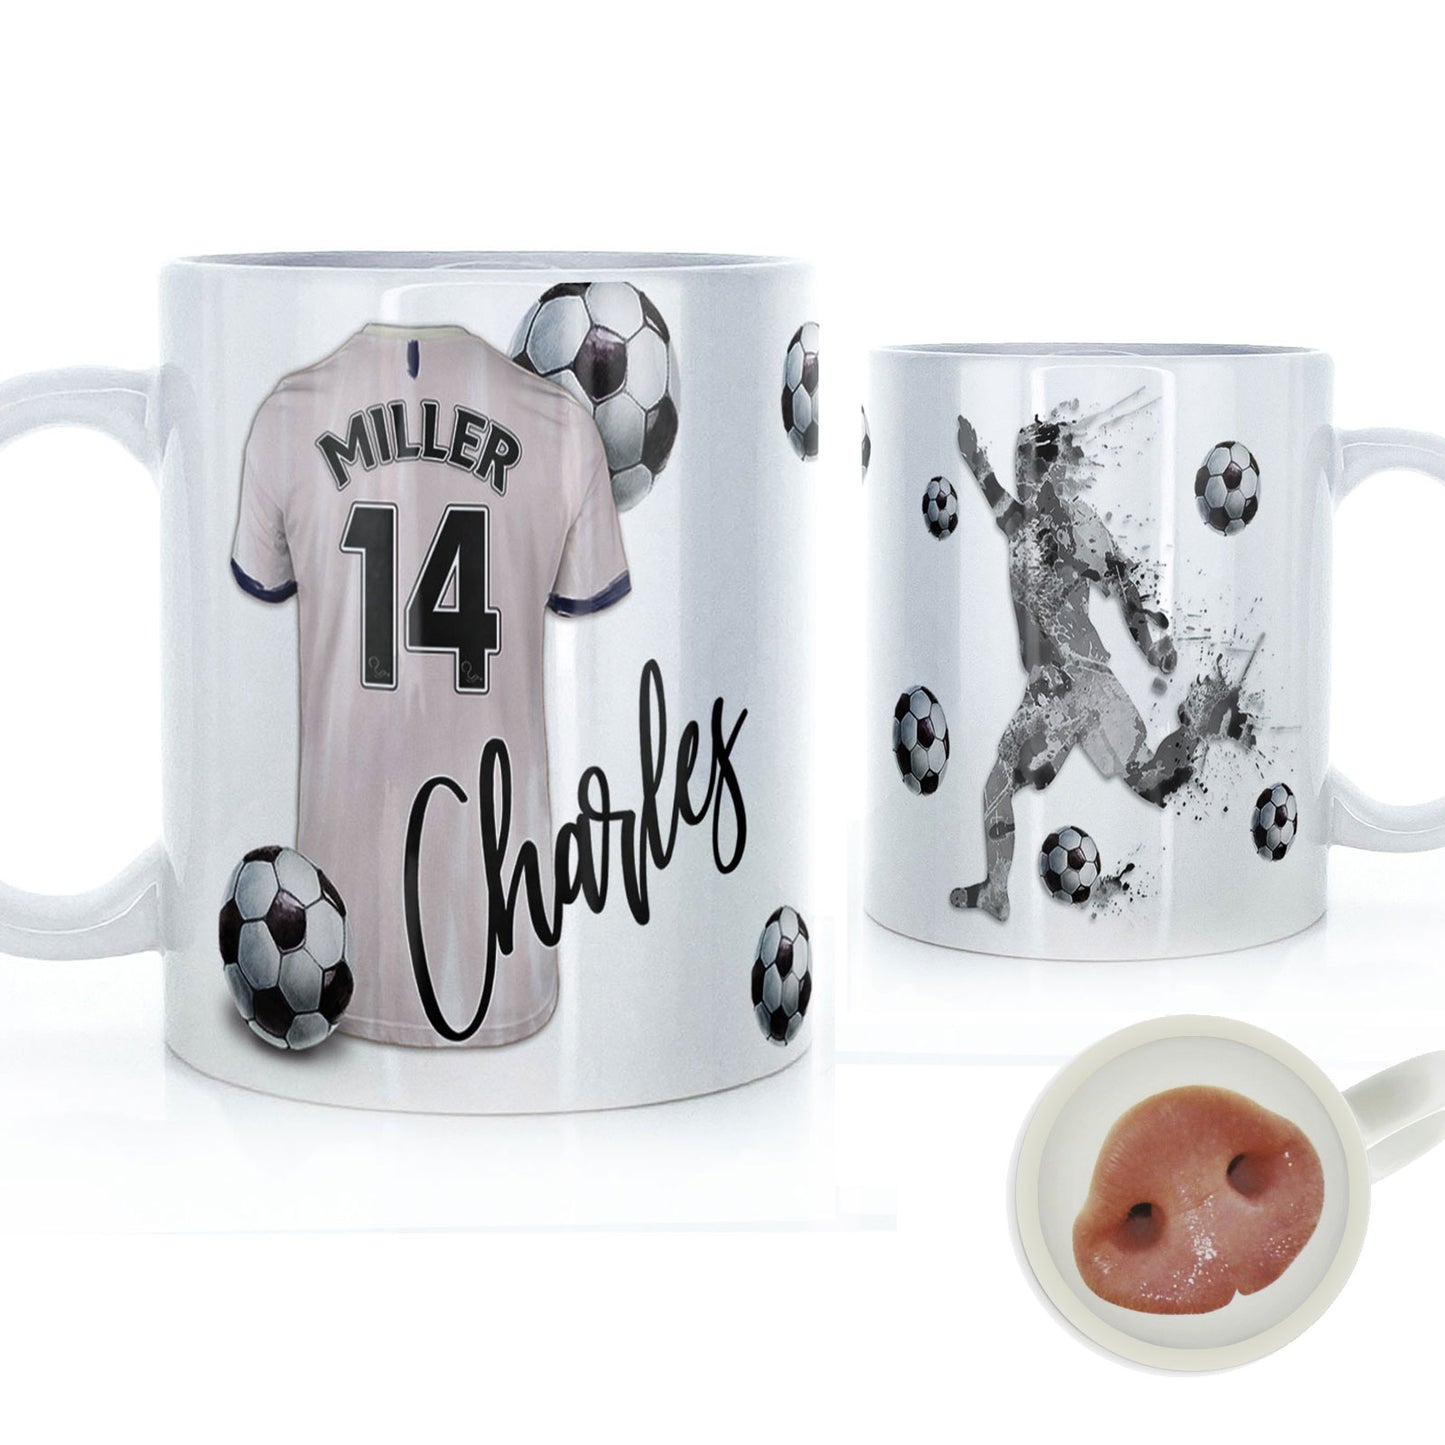 Personalised Mug with Stylish Text and White & Blue Shirt with Name & Number